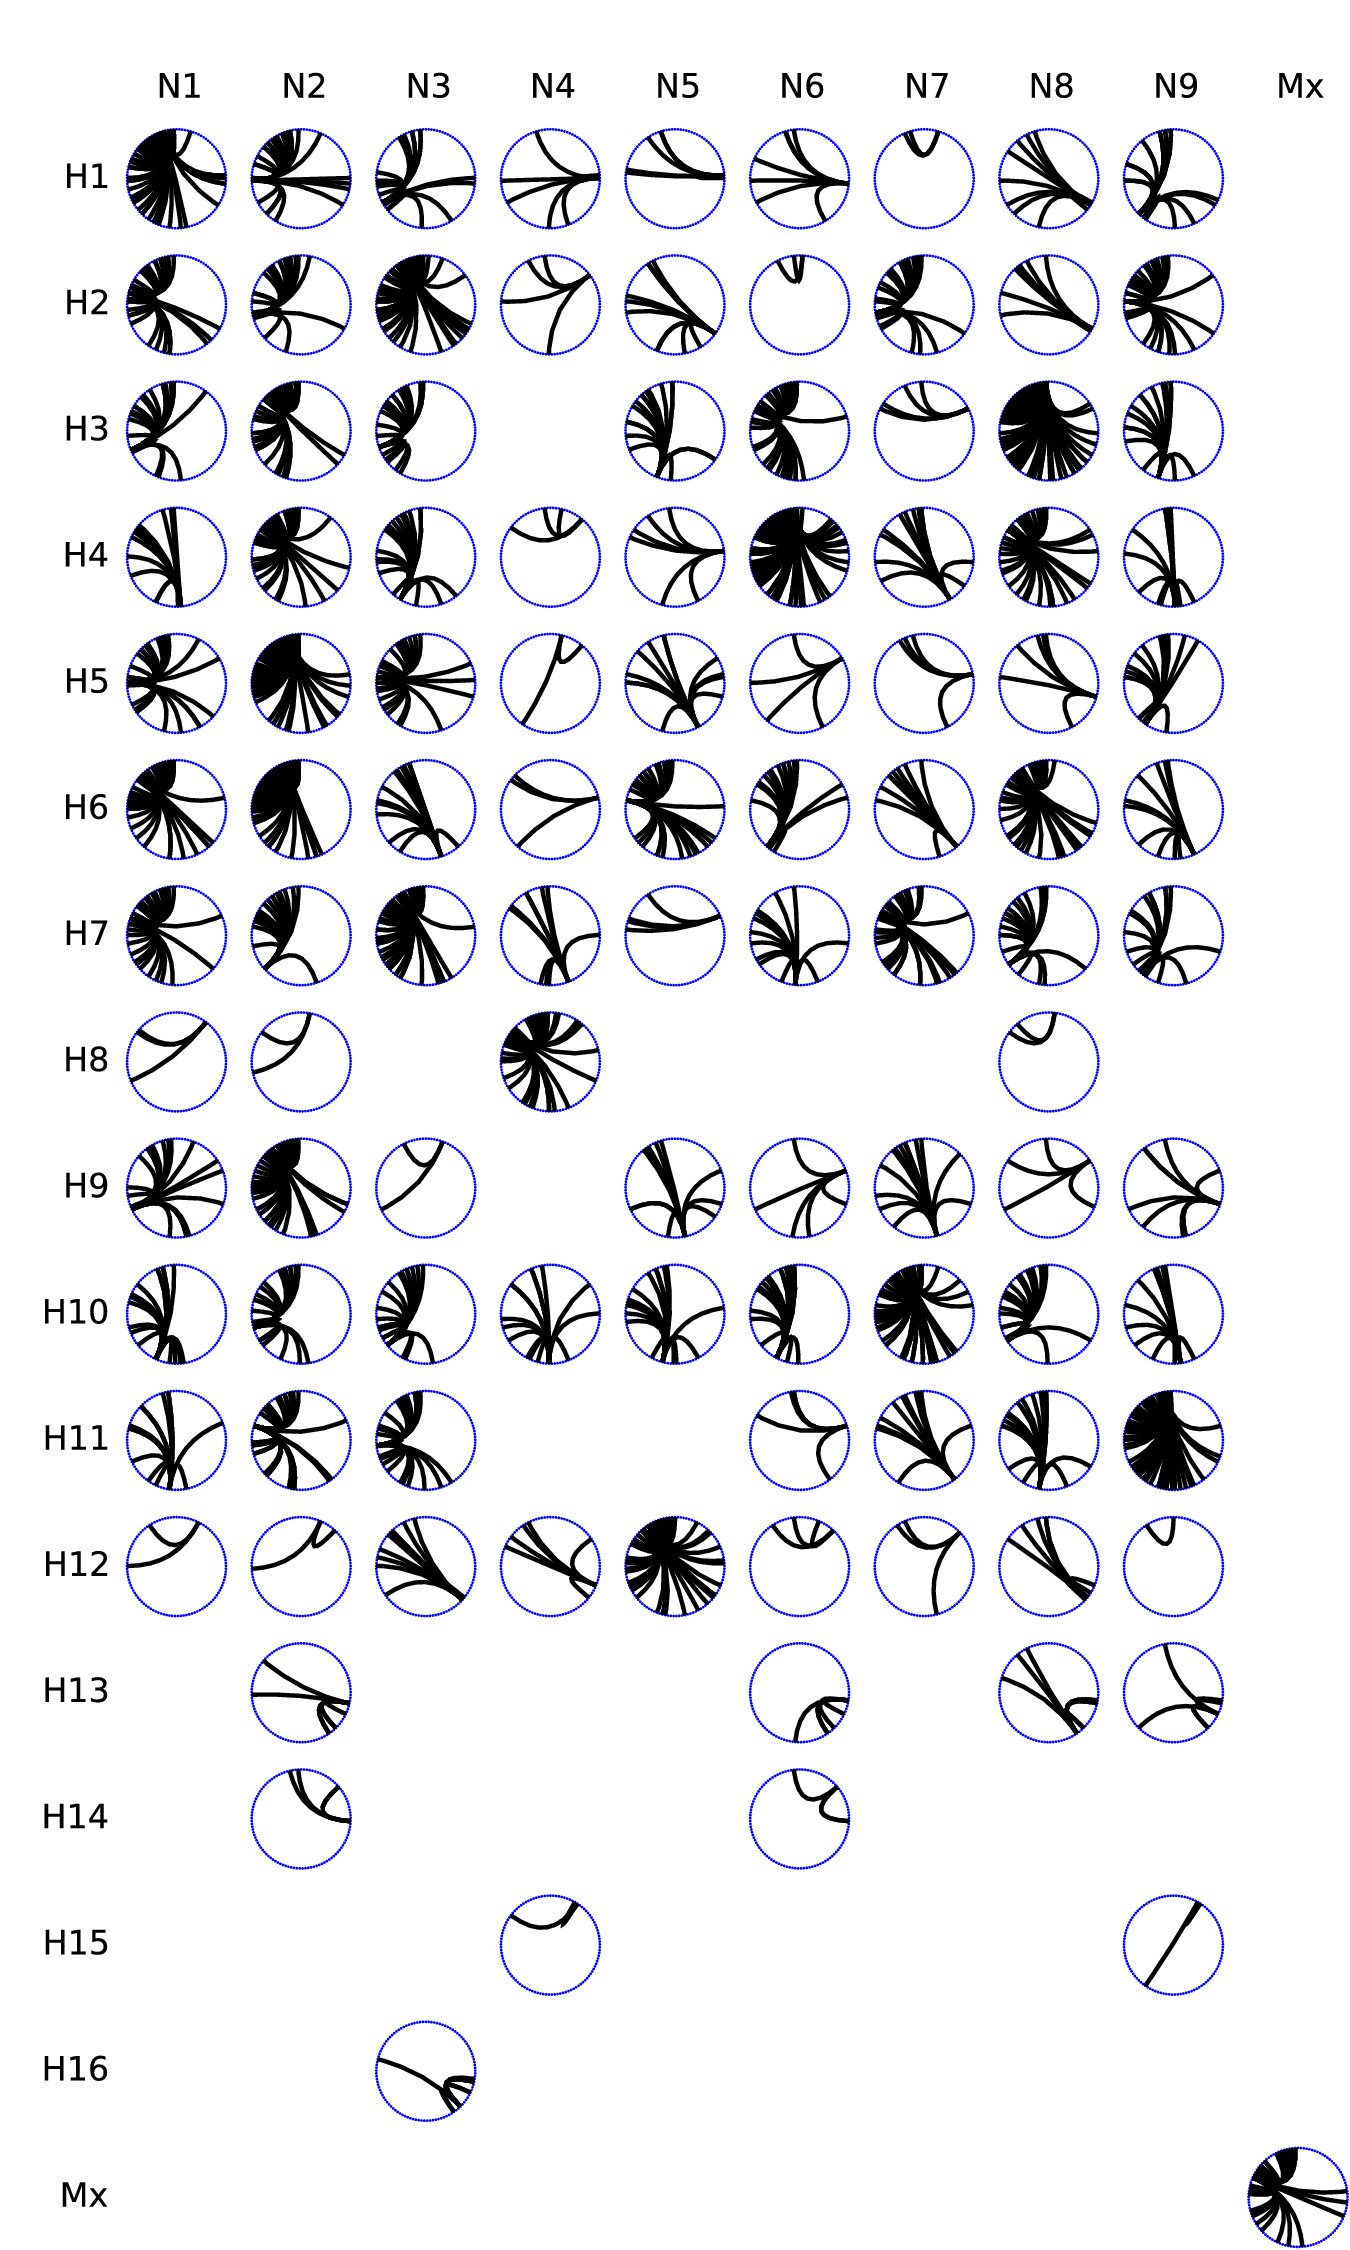 Figure 22: Circos panel depicting the connectivity of a particular HA & NA subtype combination with other subtypes. Within each circos plot, subtypes are ordered from the 12 o’clock position in increasing connectivity, starting with the lowest-ranked at 12 o’clock and increasing clockwise. The highest-connected subtype, H3N8, is found just before the 12 o’clock position. Mx: “mixed subtype”.